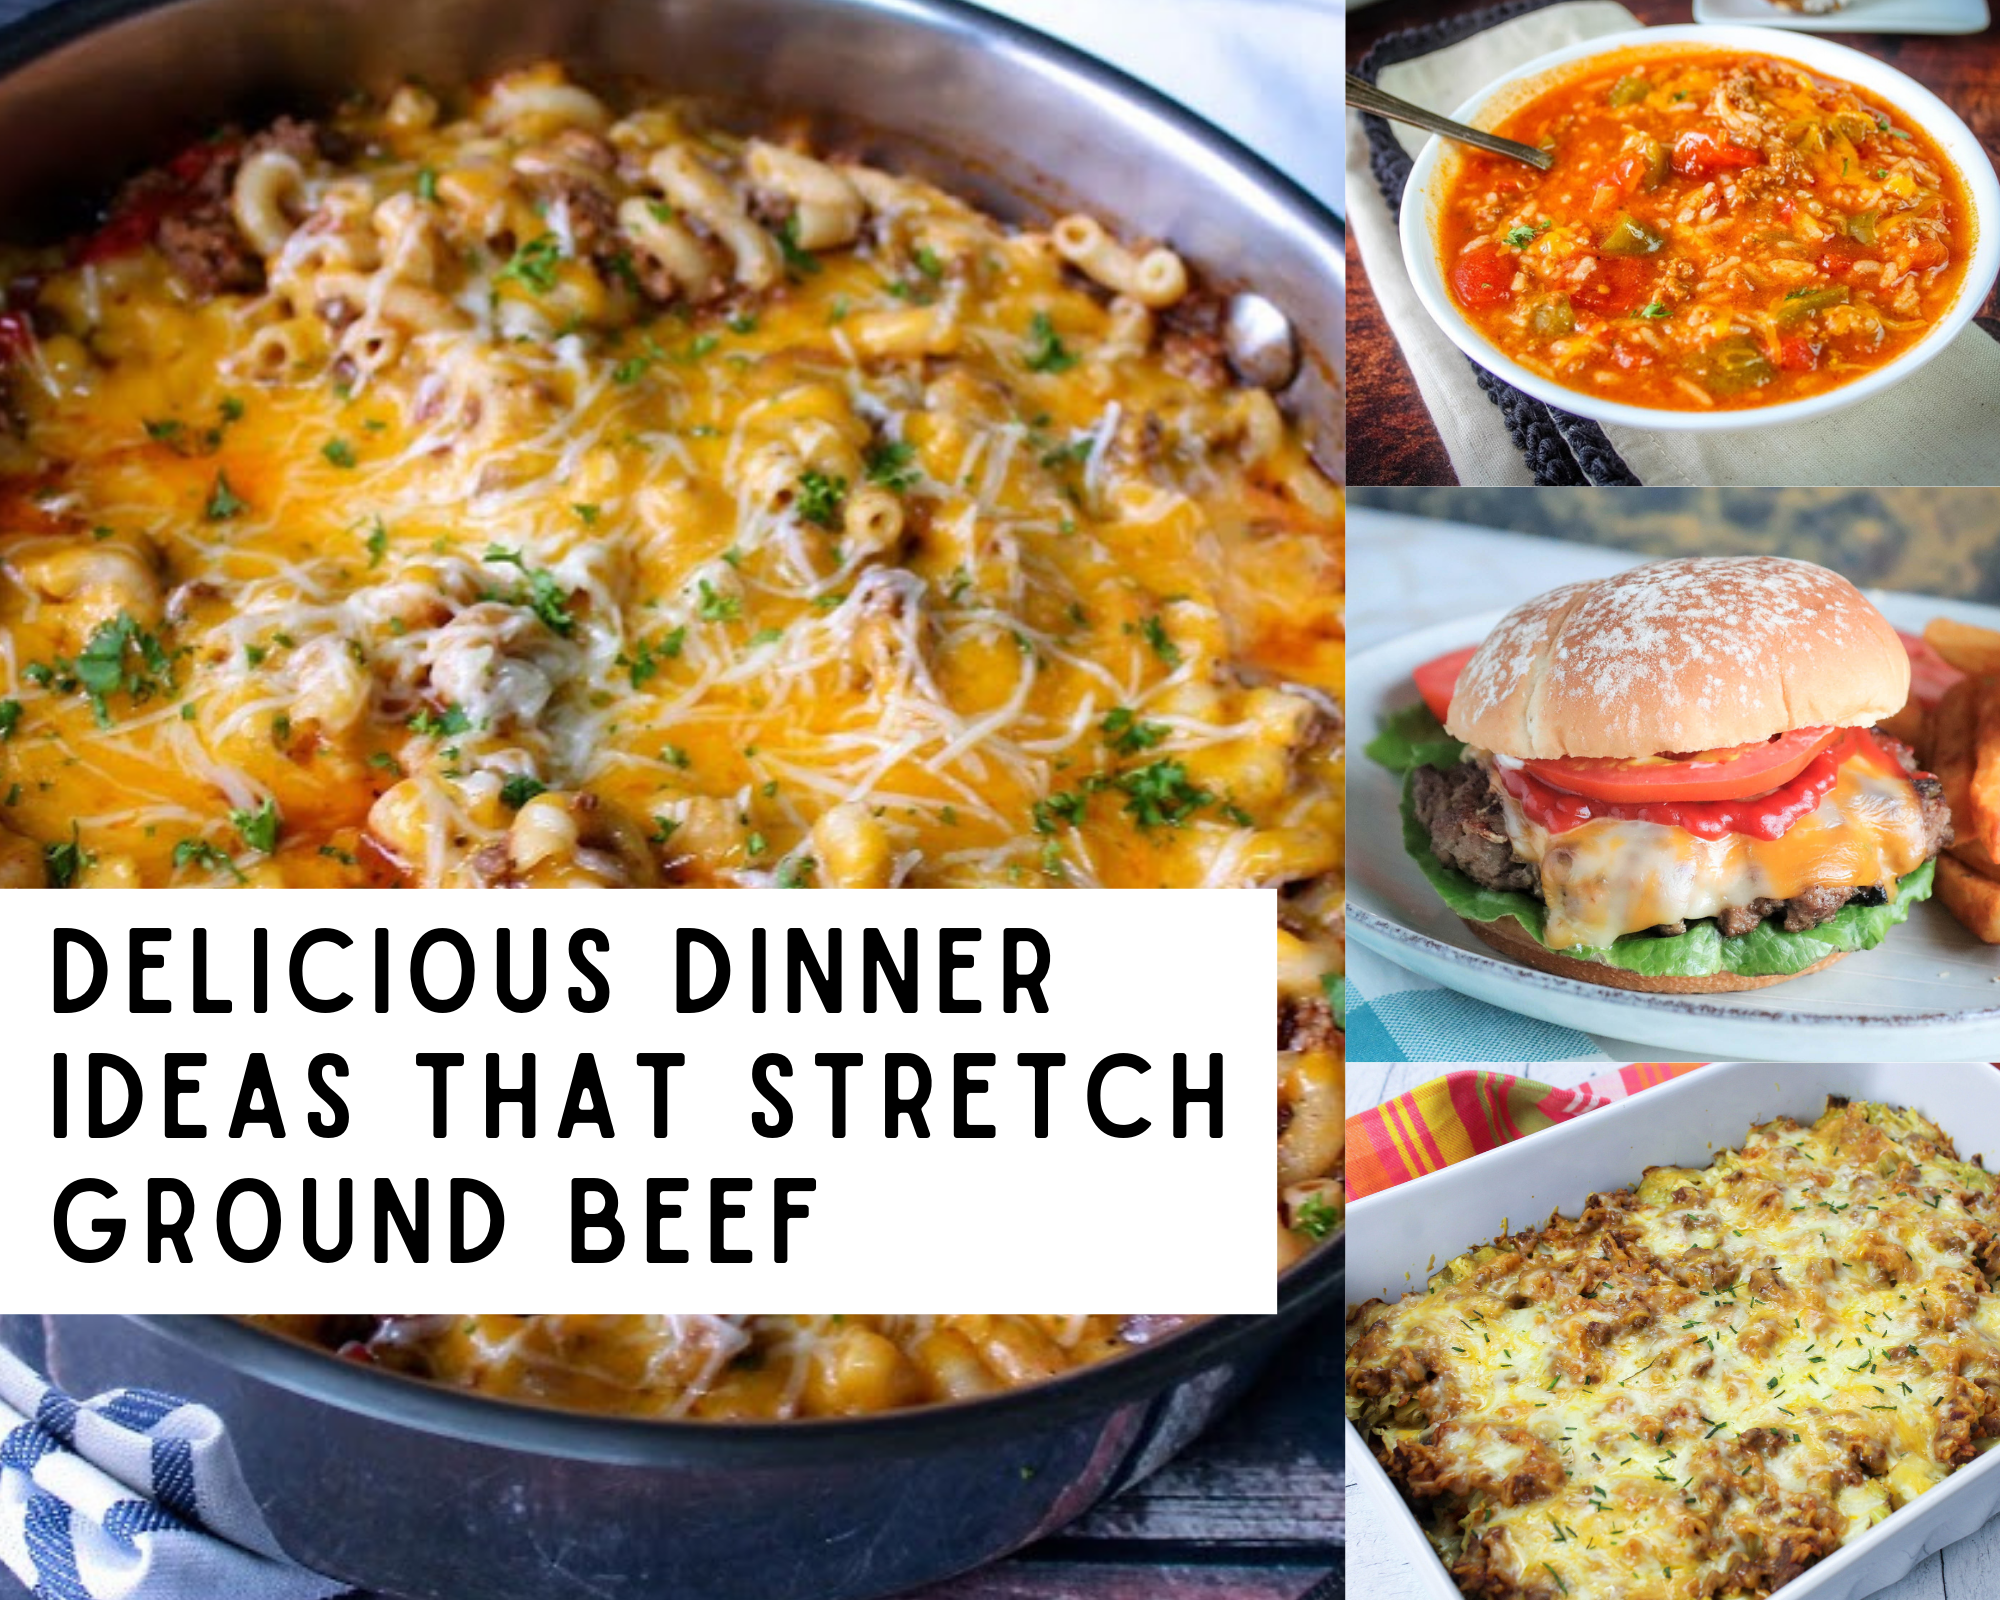 Delicious Dinner Ideas that Stretch Ground Beef